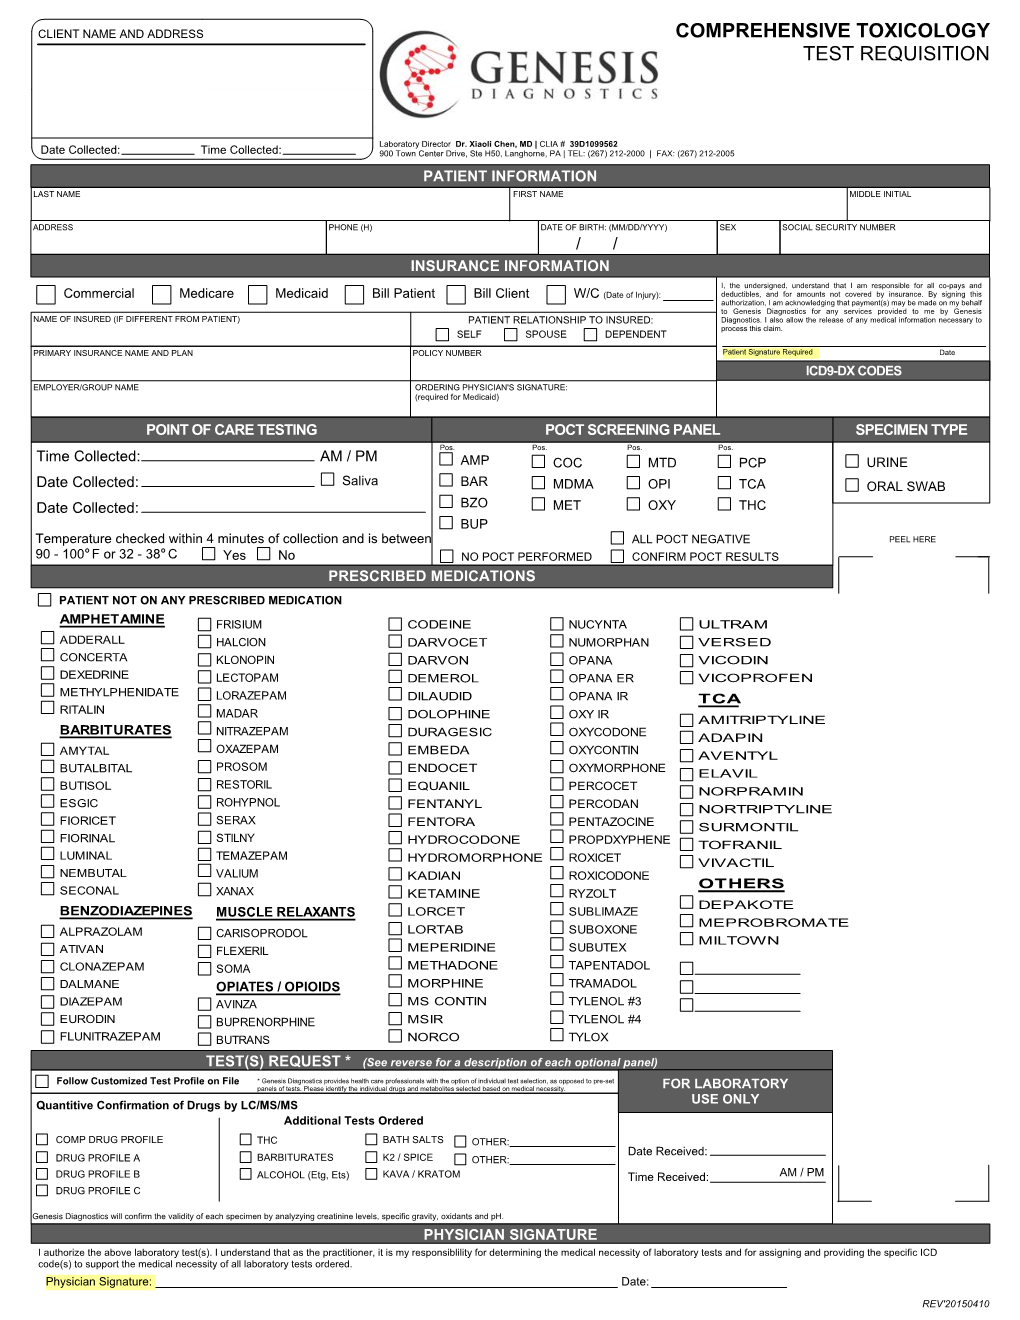 Comprehensive Toxicology Test Requisition